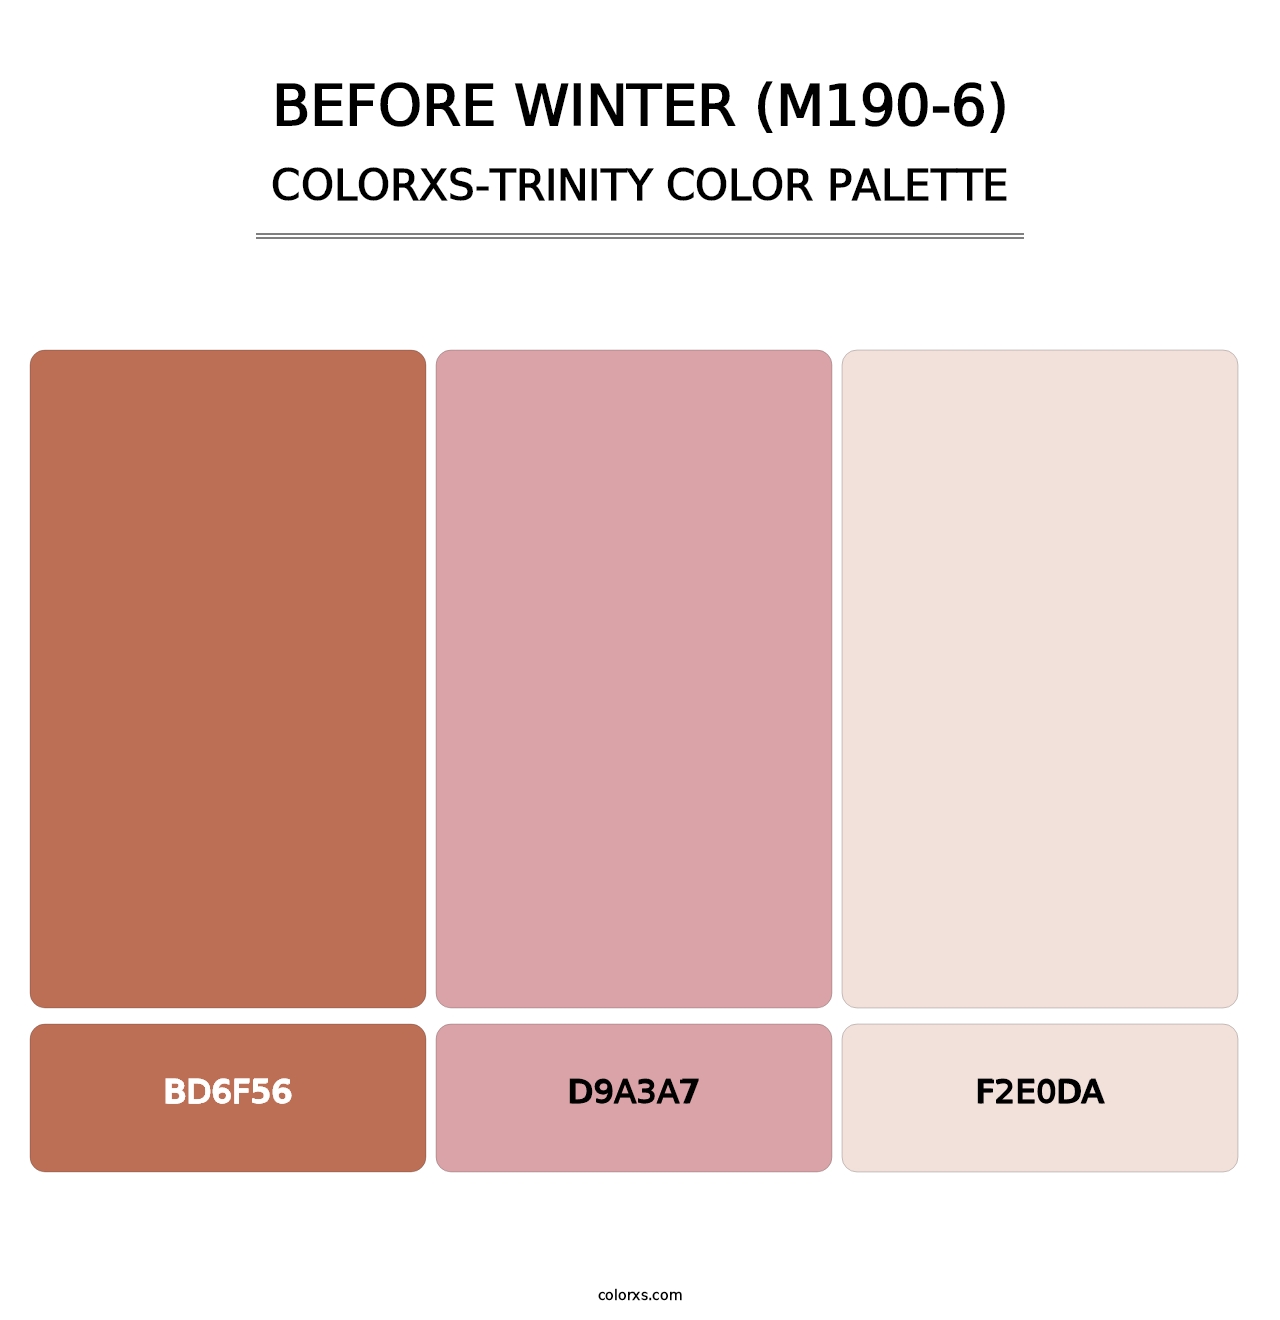 Before Winter (M190-6) - Colorxs Trinity Palette